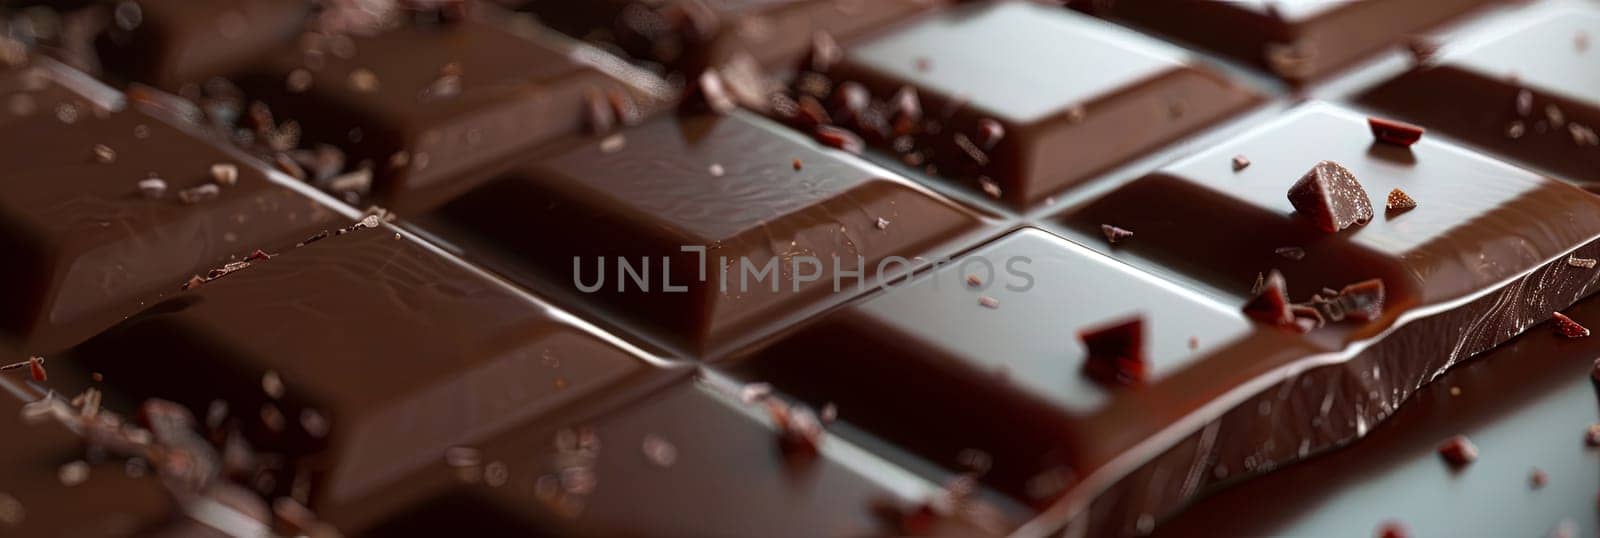 Detailed close-up of dark chocolate bar with bite mark visible on smooth surface.